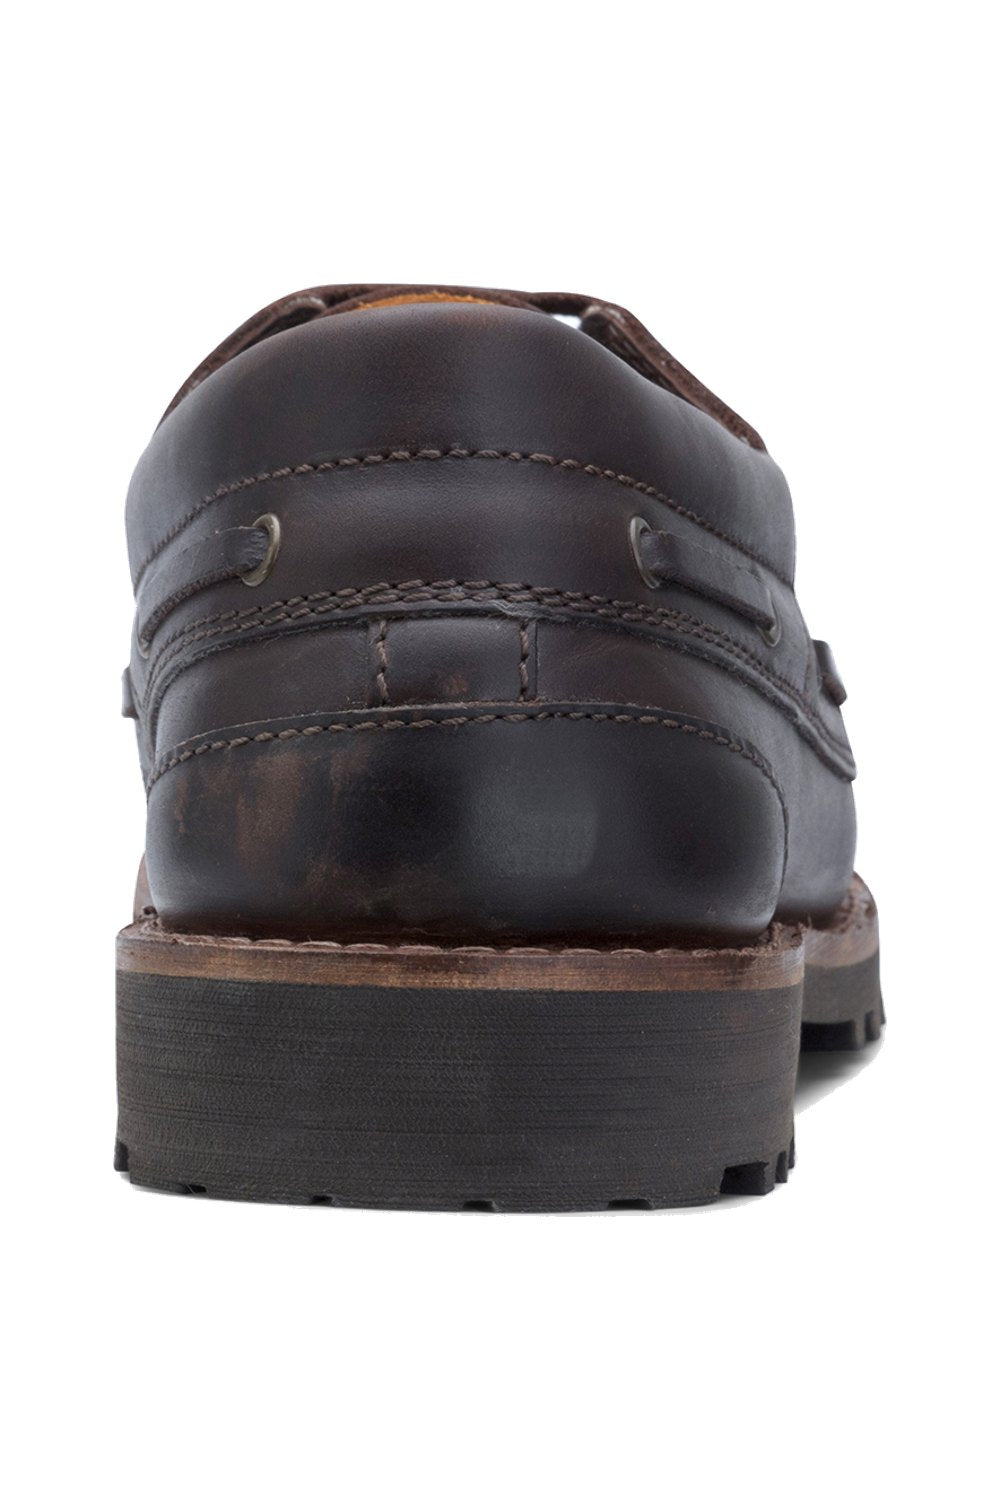 Kintyre Rugged Moccasin